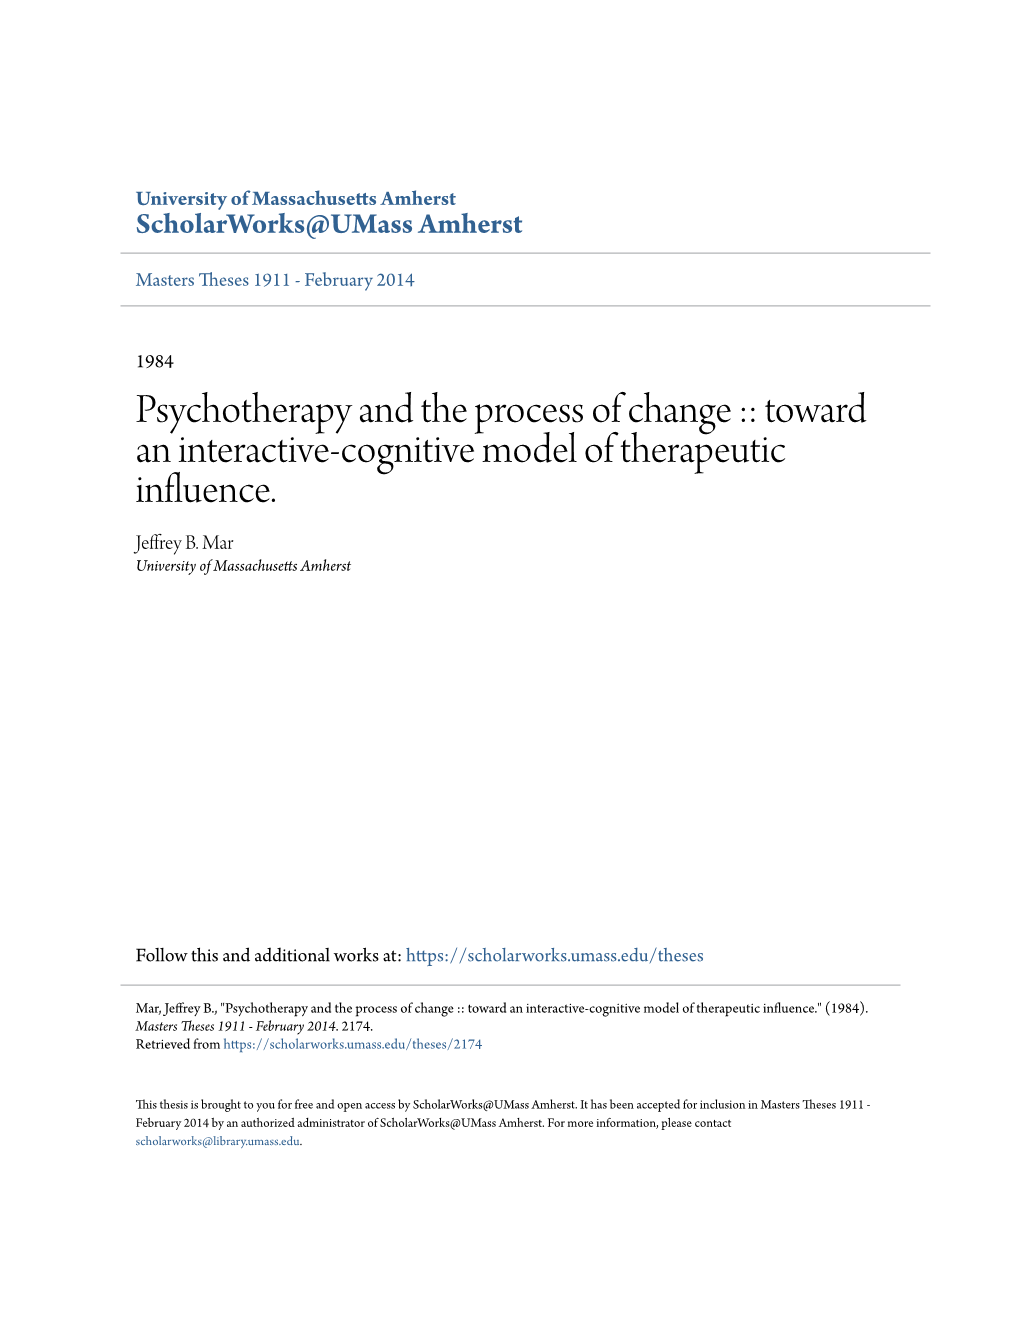 Psychotherapy and the Process of Change :: Toward an Interactive-Cognitive Model of Therapeutic Influence